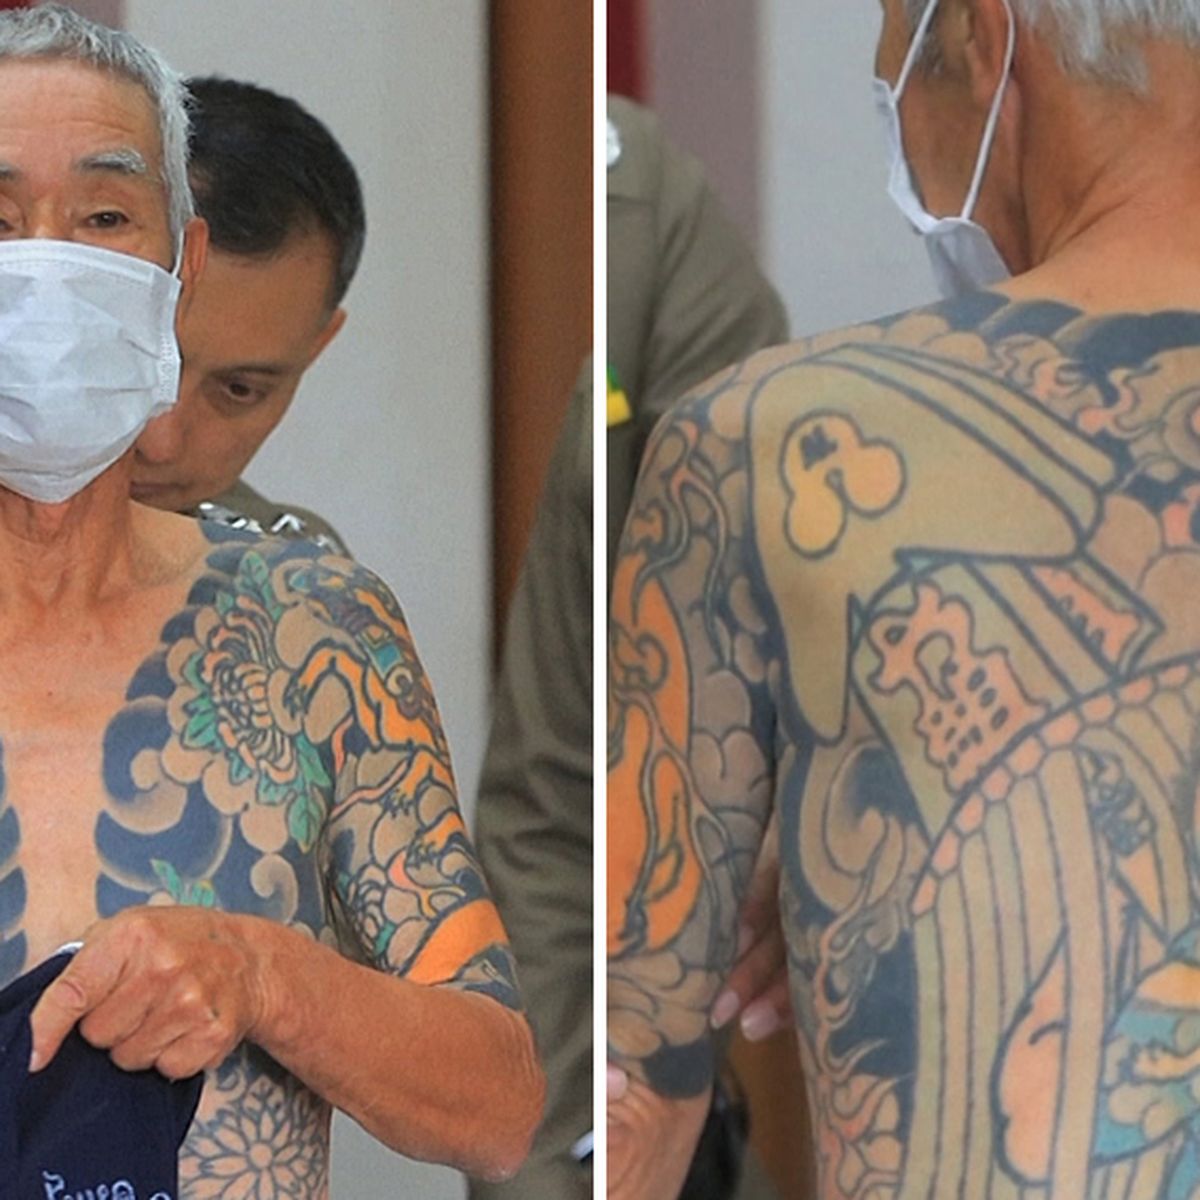 Japanese fugitive's tattoo leads to his arrest after ten years on the run